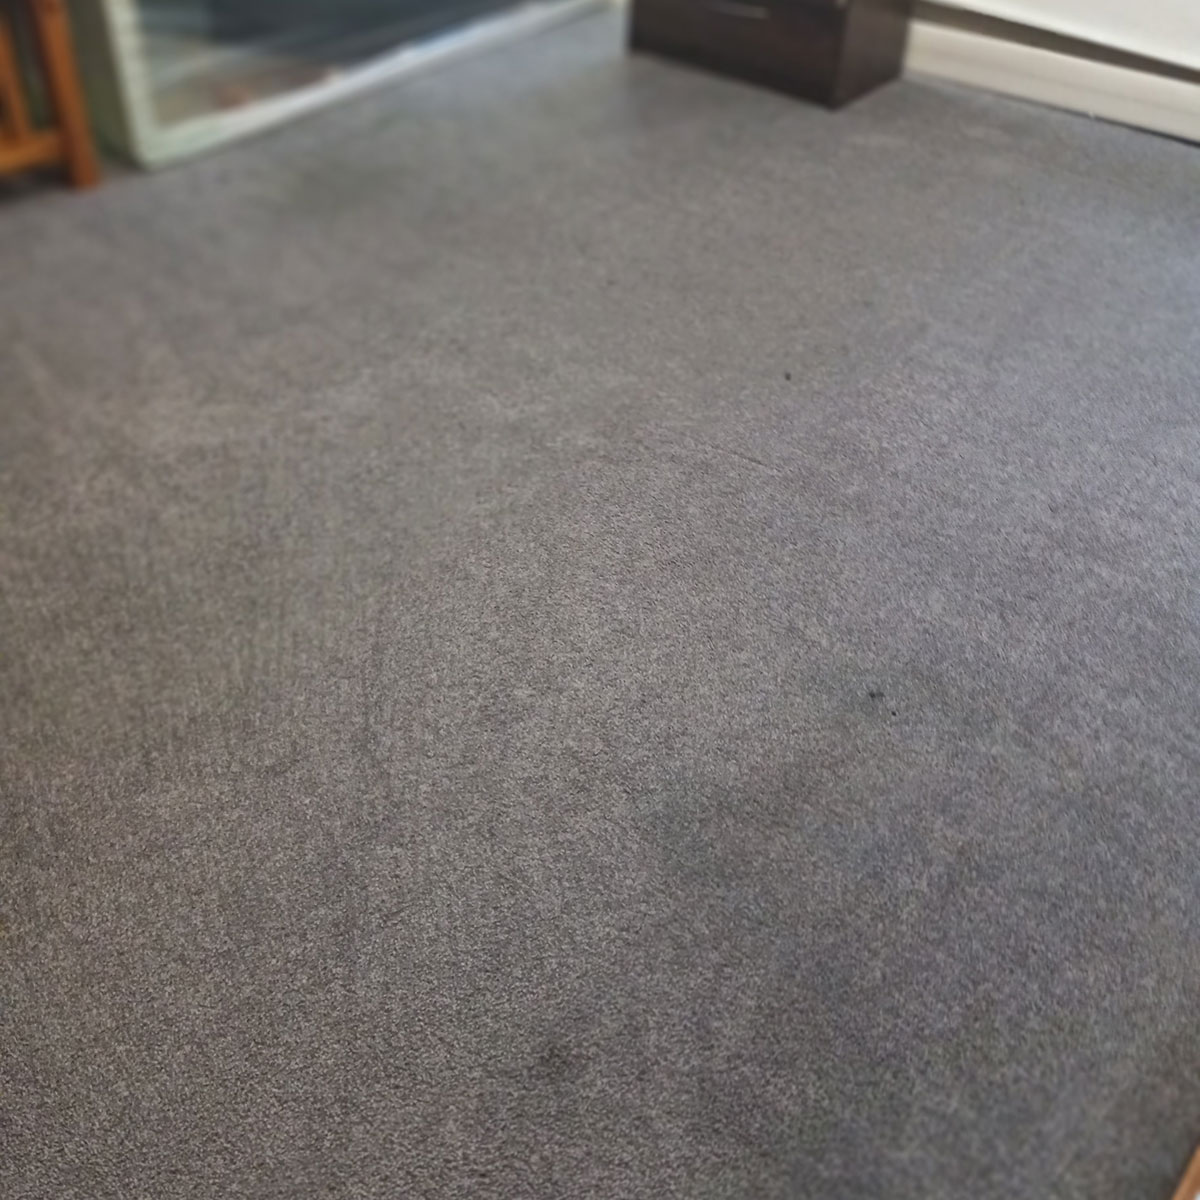 AFTER: Brighten a Room with Carpet Cleaning